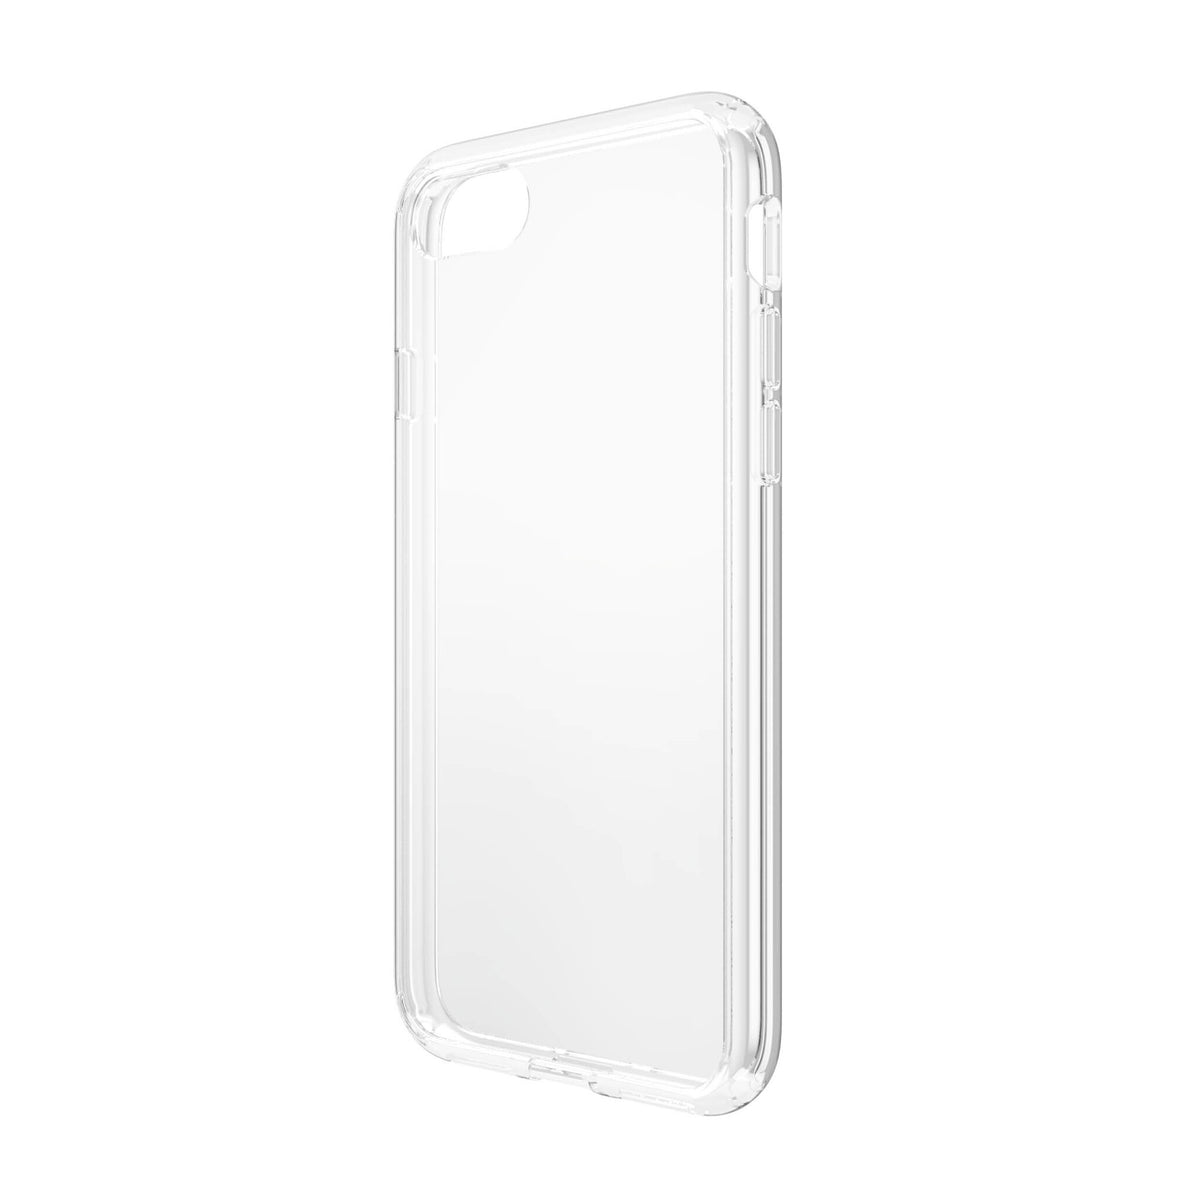 PanzerGlass ® HardCase for iPhone SE (2020/2022) / 7 / 8 in Transparent